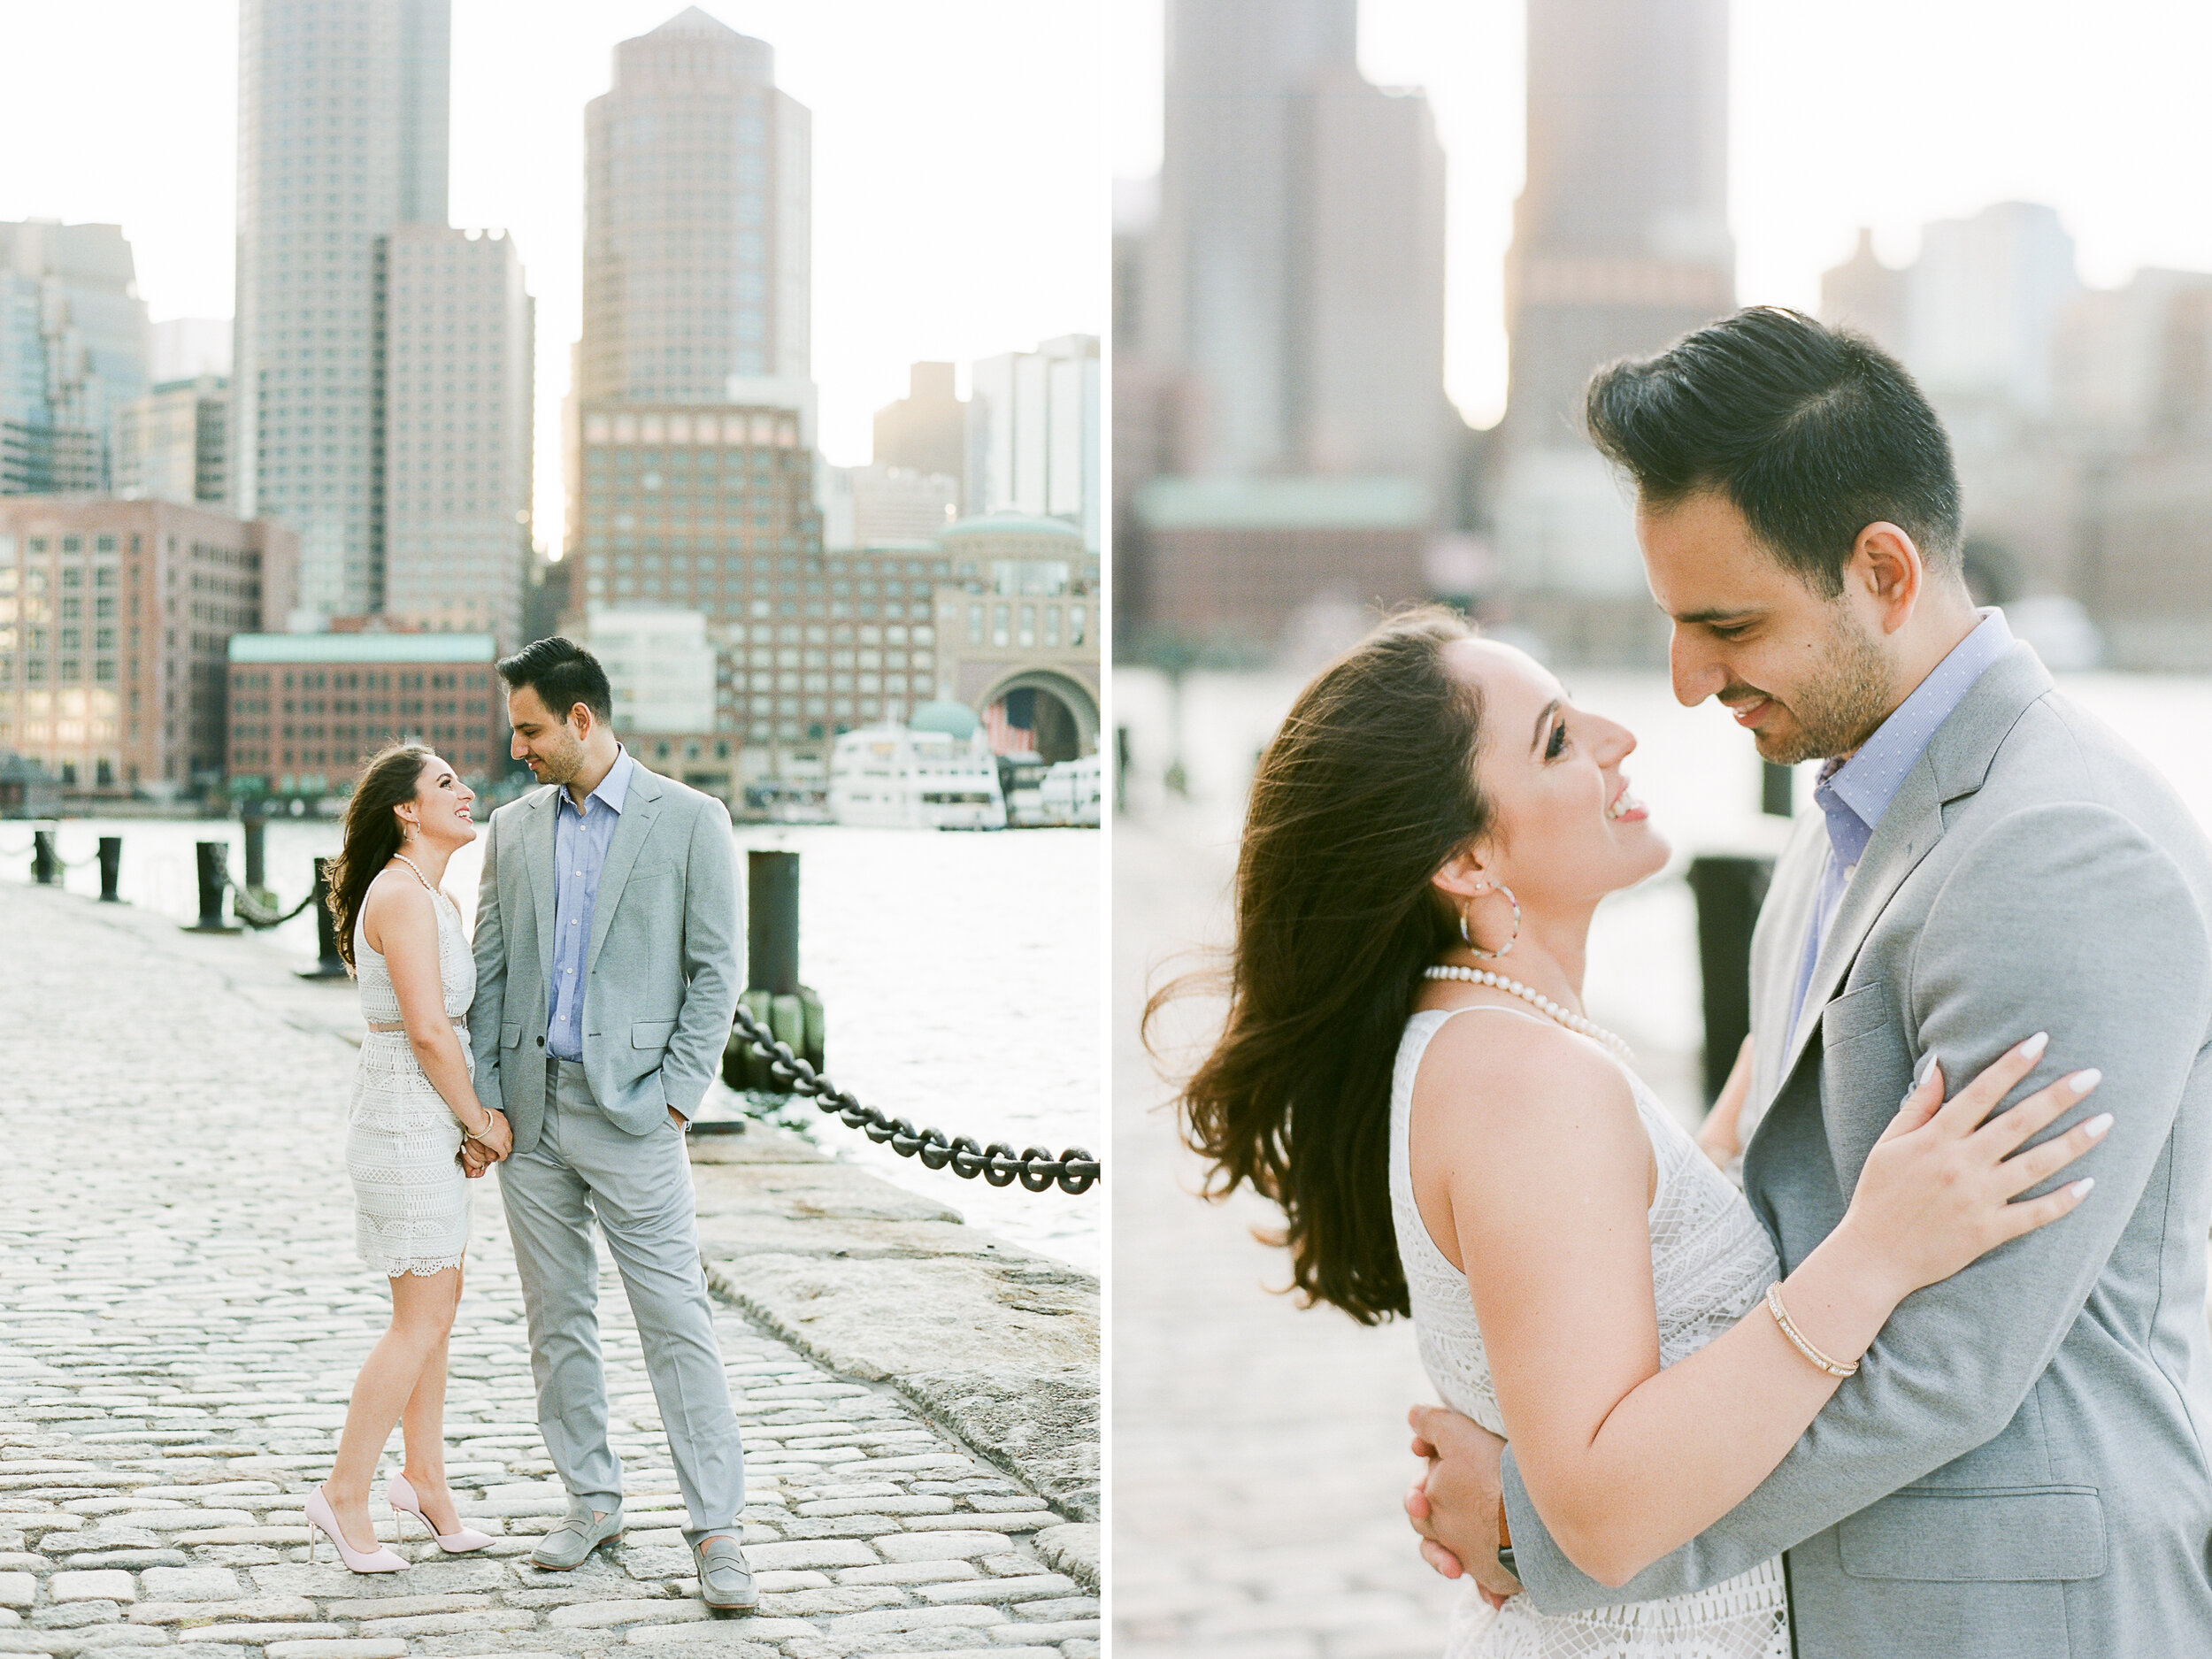 Light and Airy Wedding Photographers in Western MA